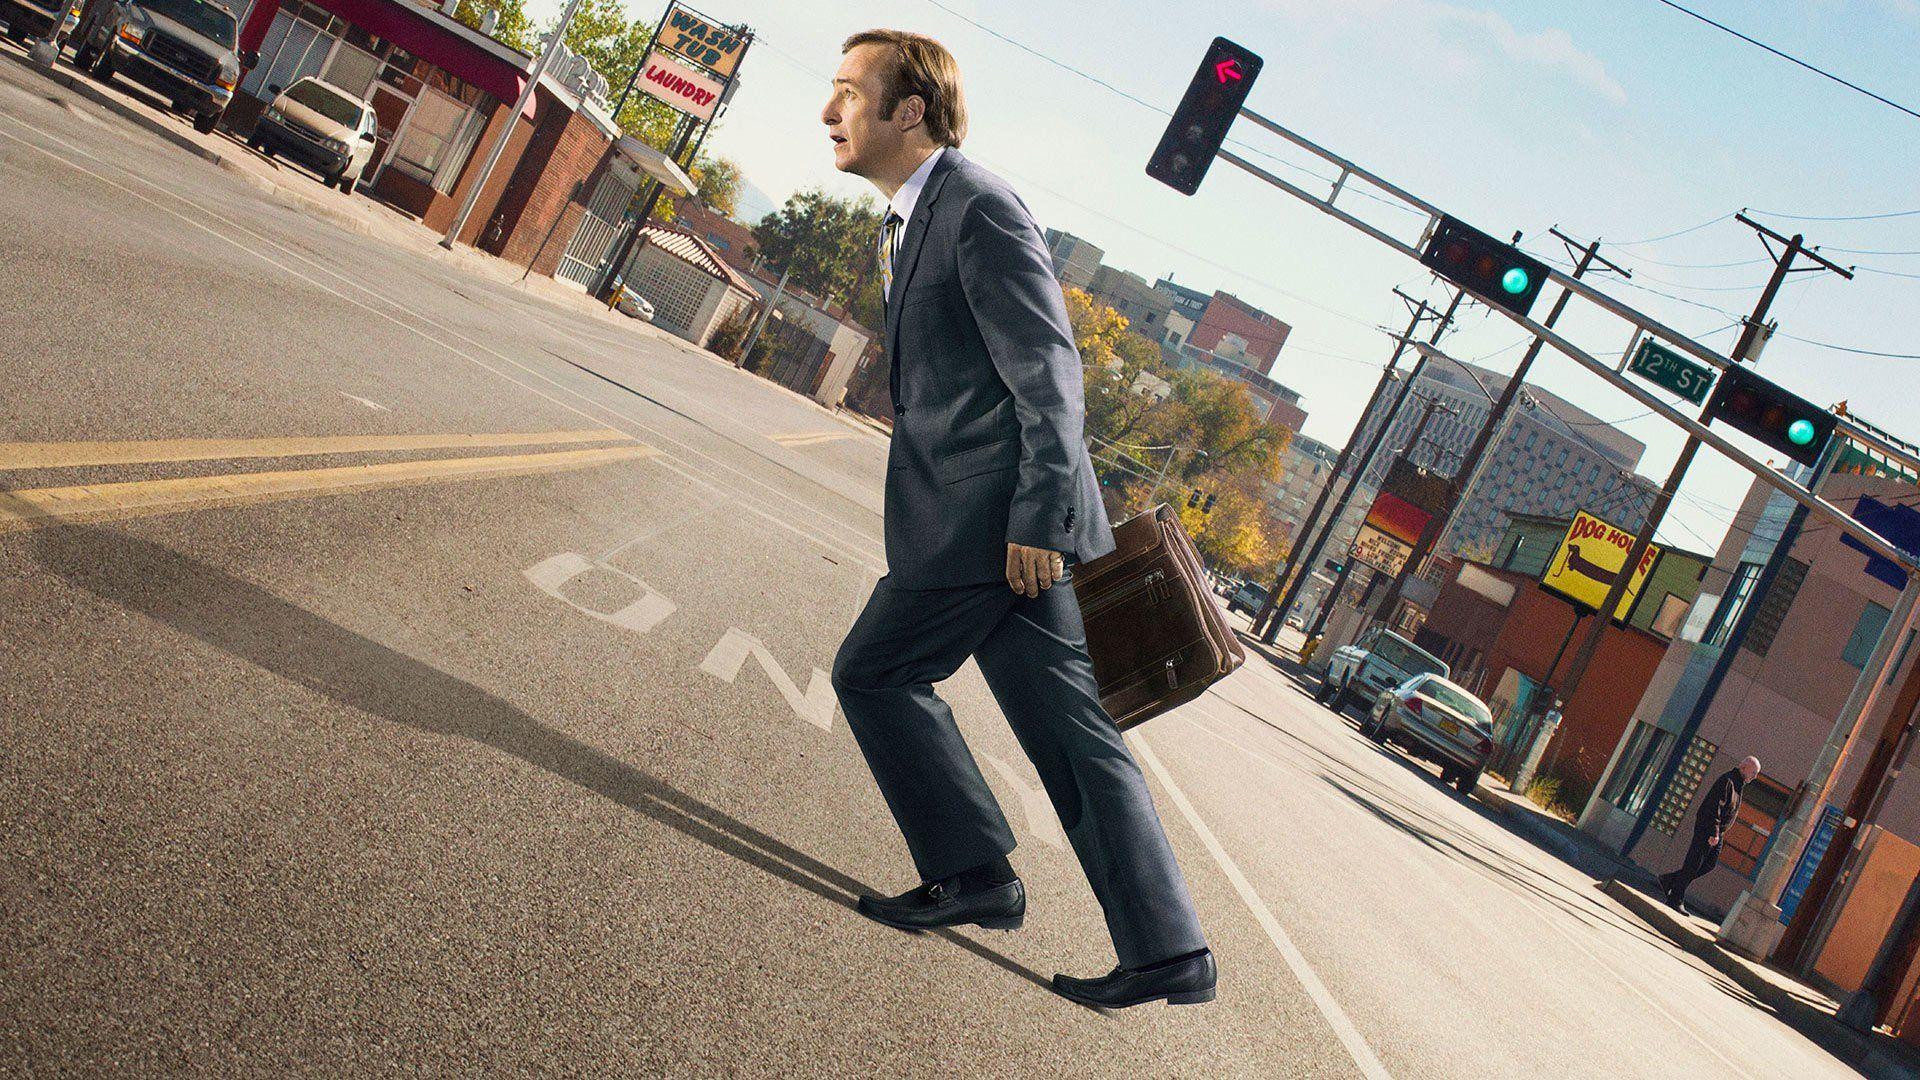 Better Call Saul [Articles] - IGN